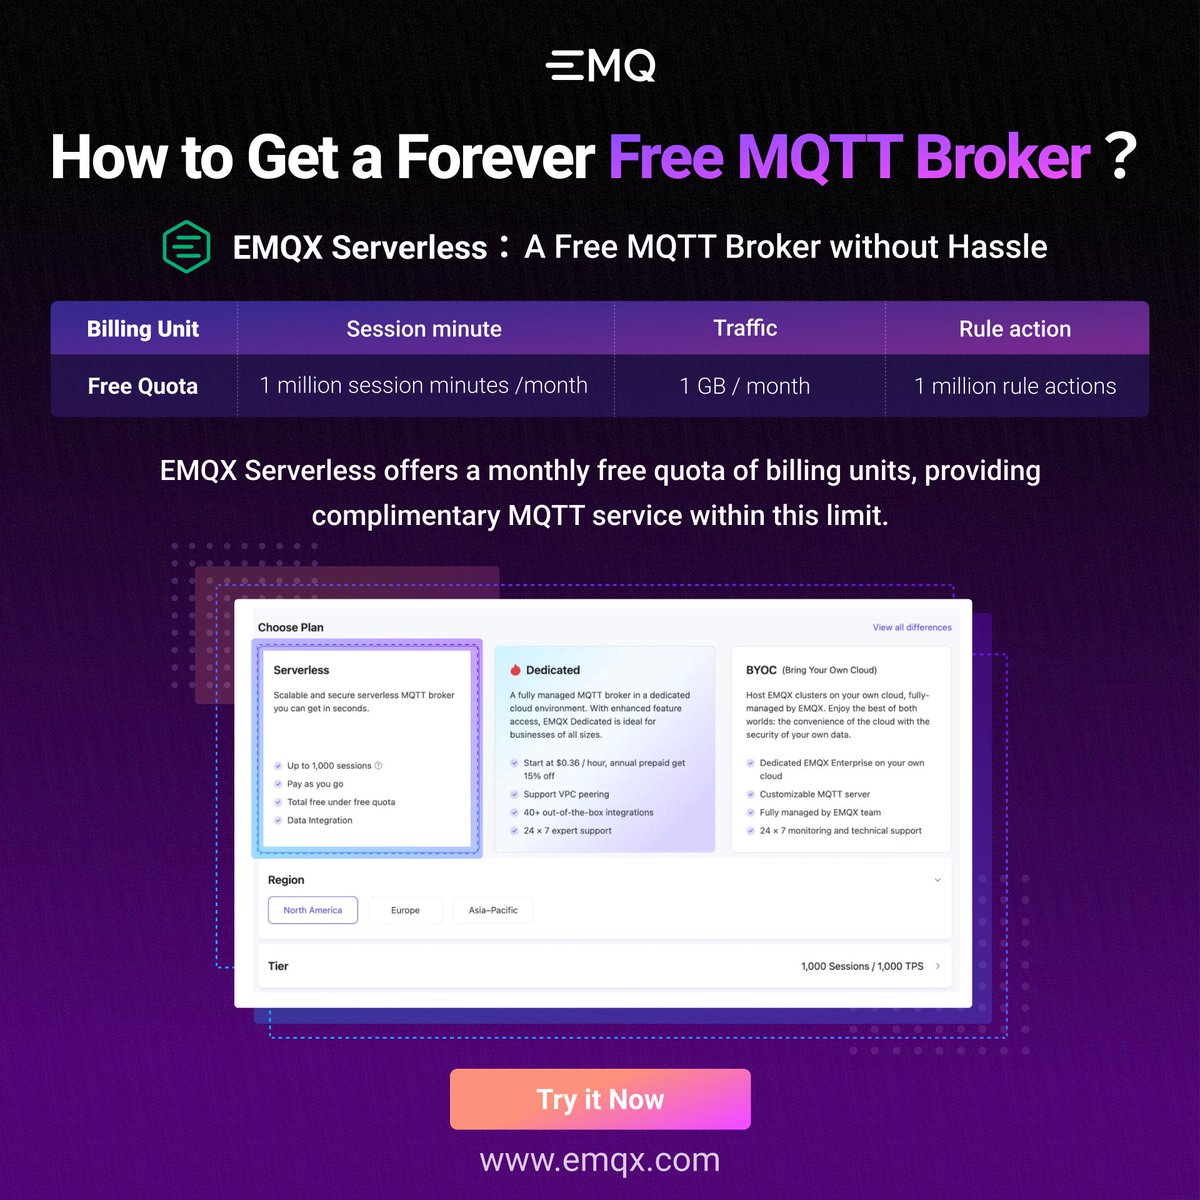 💰 Looking to cut costs on your #IoT projects? Look no further! 🔍With #EMQXServerless, a free #MQTT broker, scalability meets performance without breaking the bank.💡Ideal for developers and small businesses diving into the IoT realm. Try it Today ⬇️ social.emqx.com/u/P4EnLQ